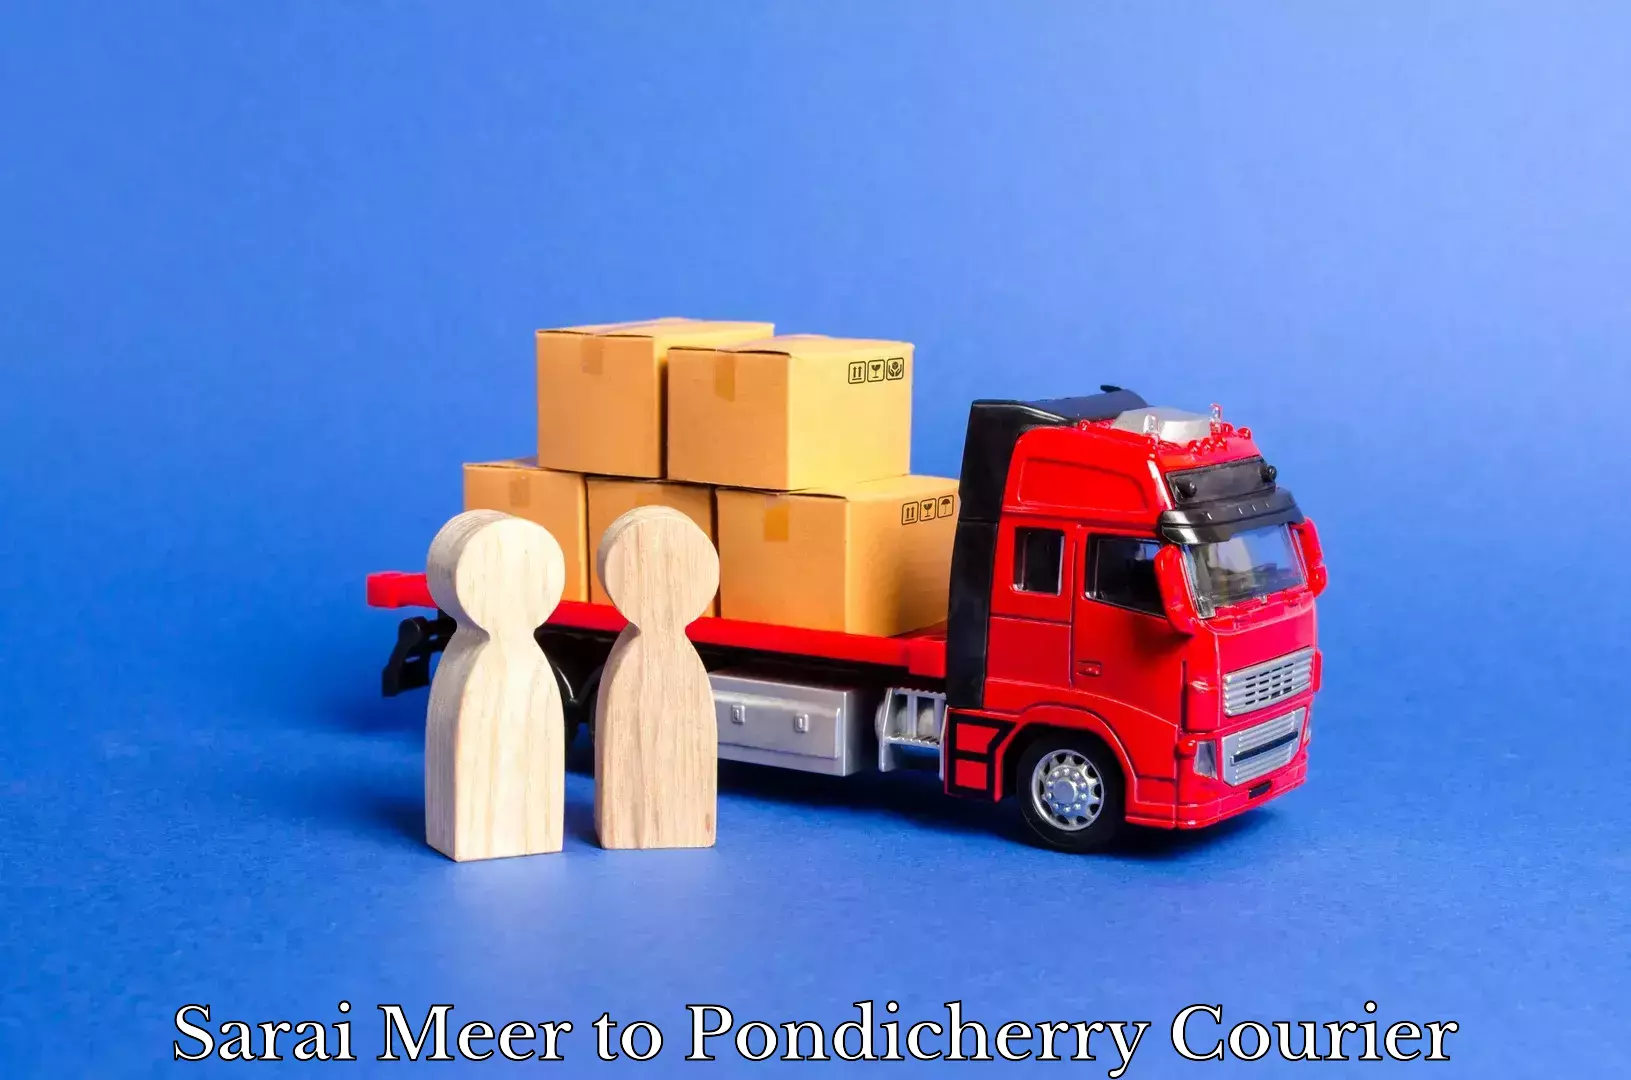 Online package tracking Sarai Meer to Pondicherry